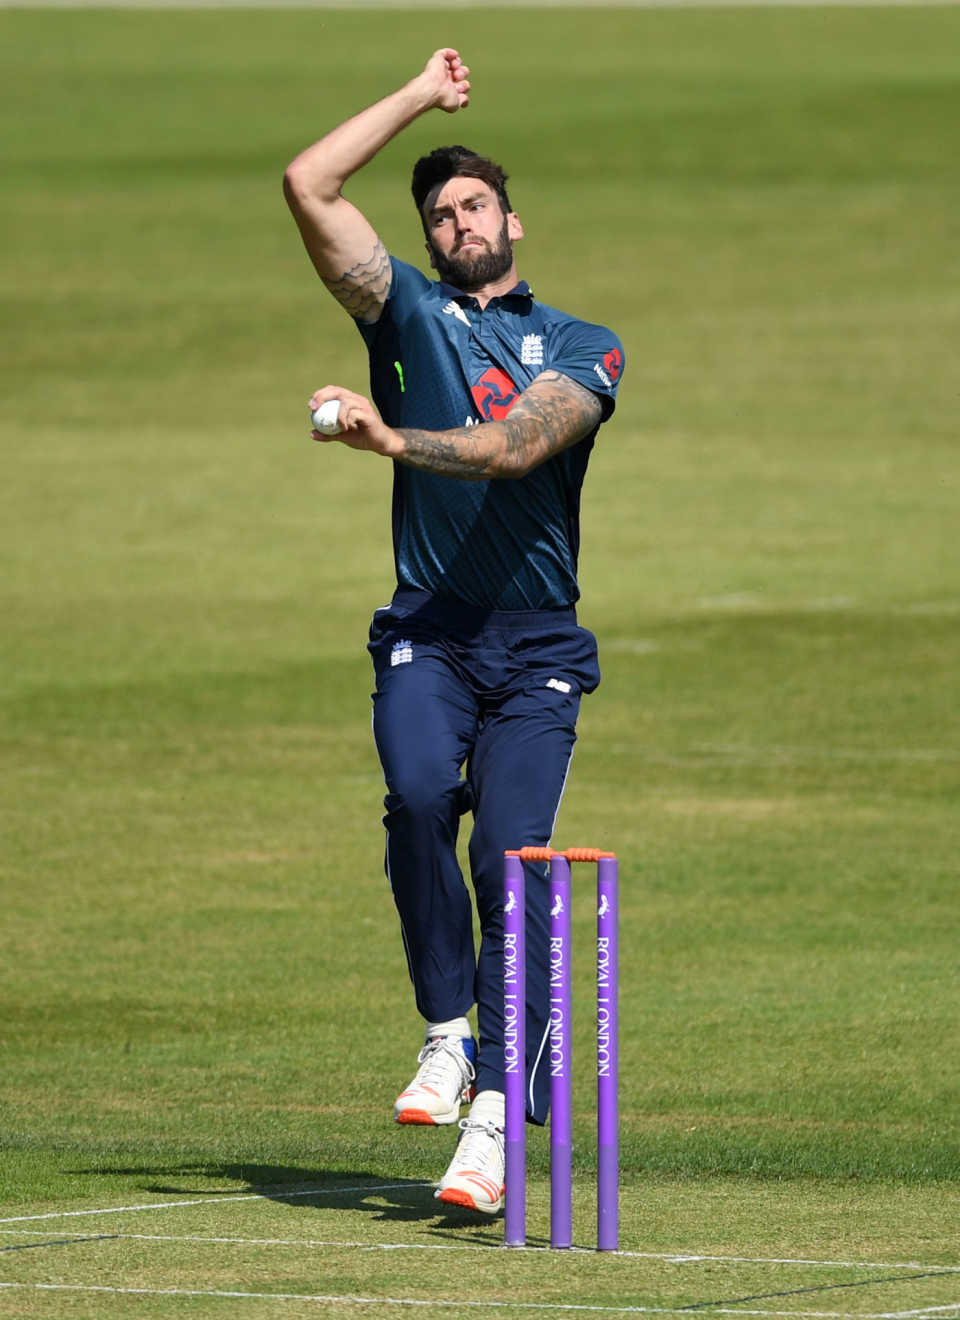 Reece Topley's Lions form is promising for Hampshire